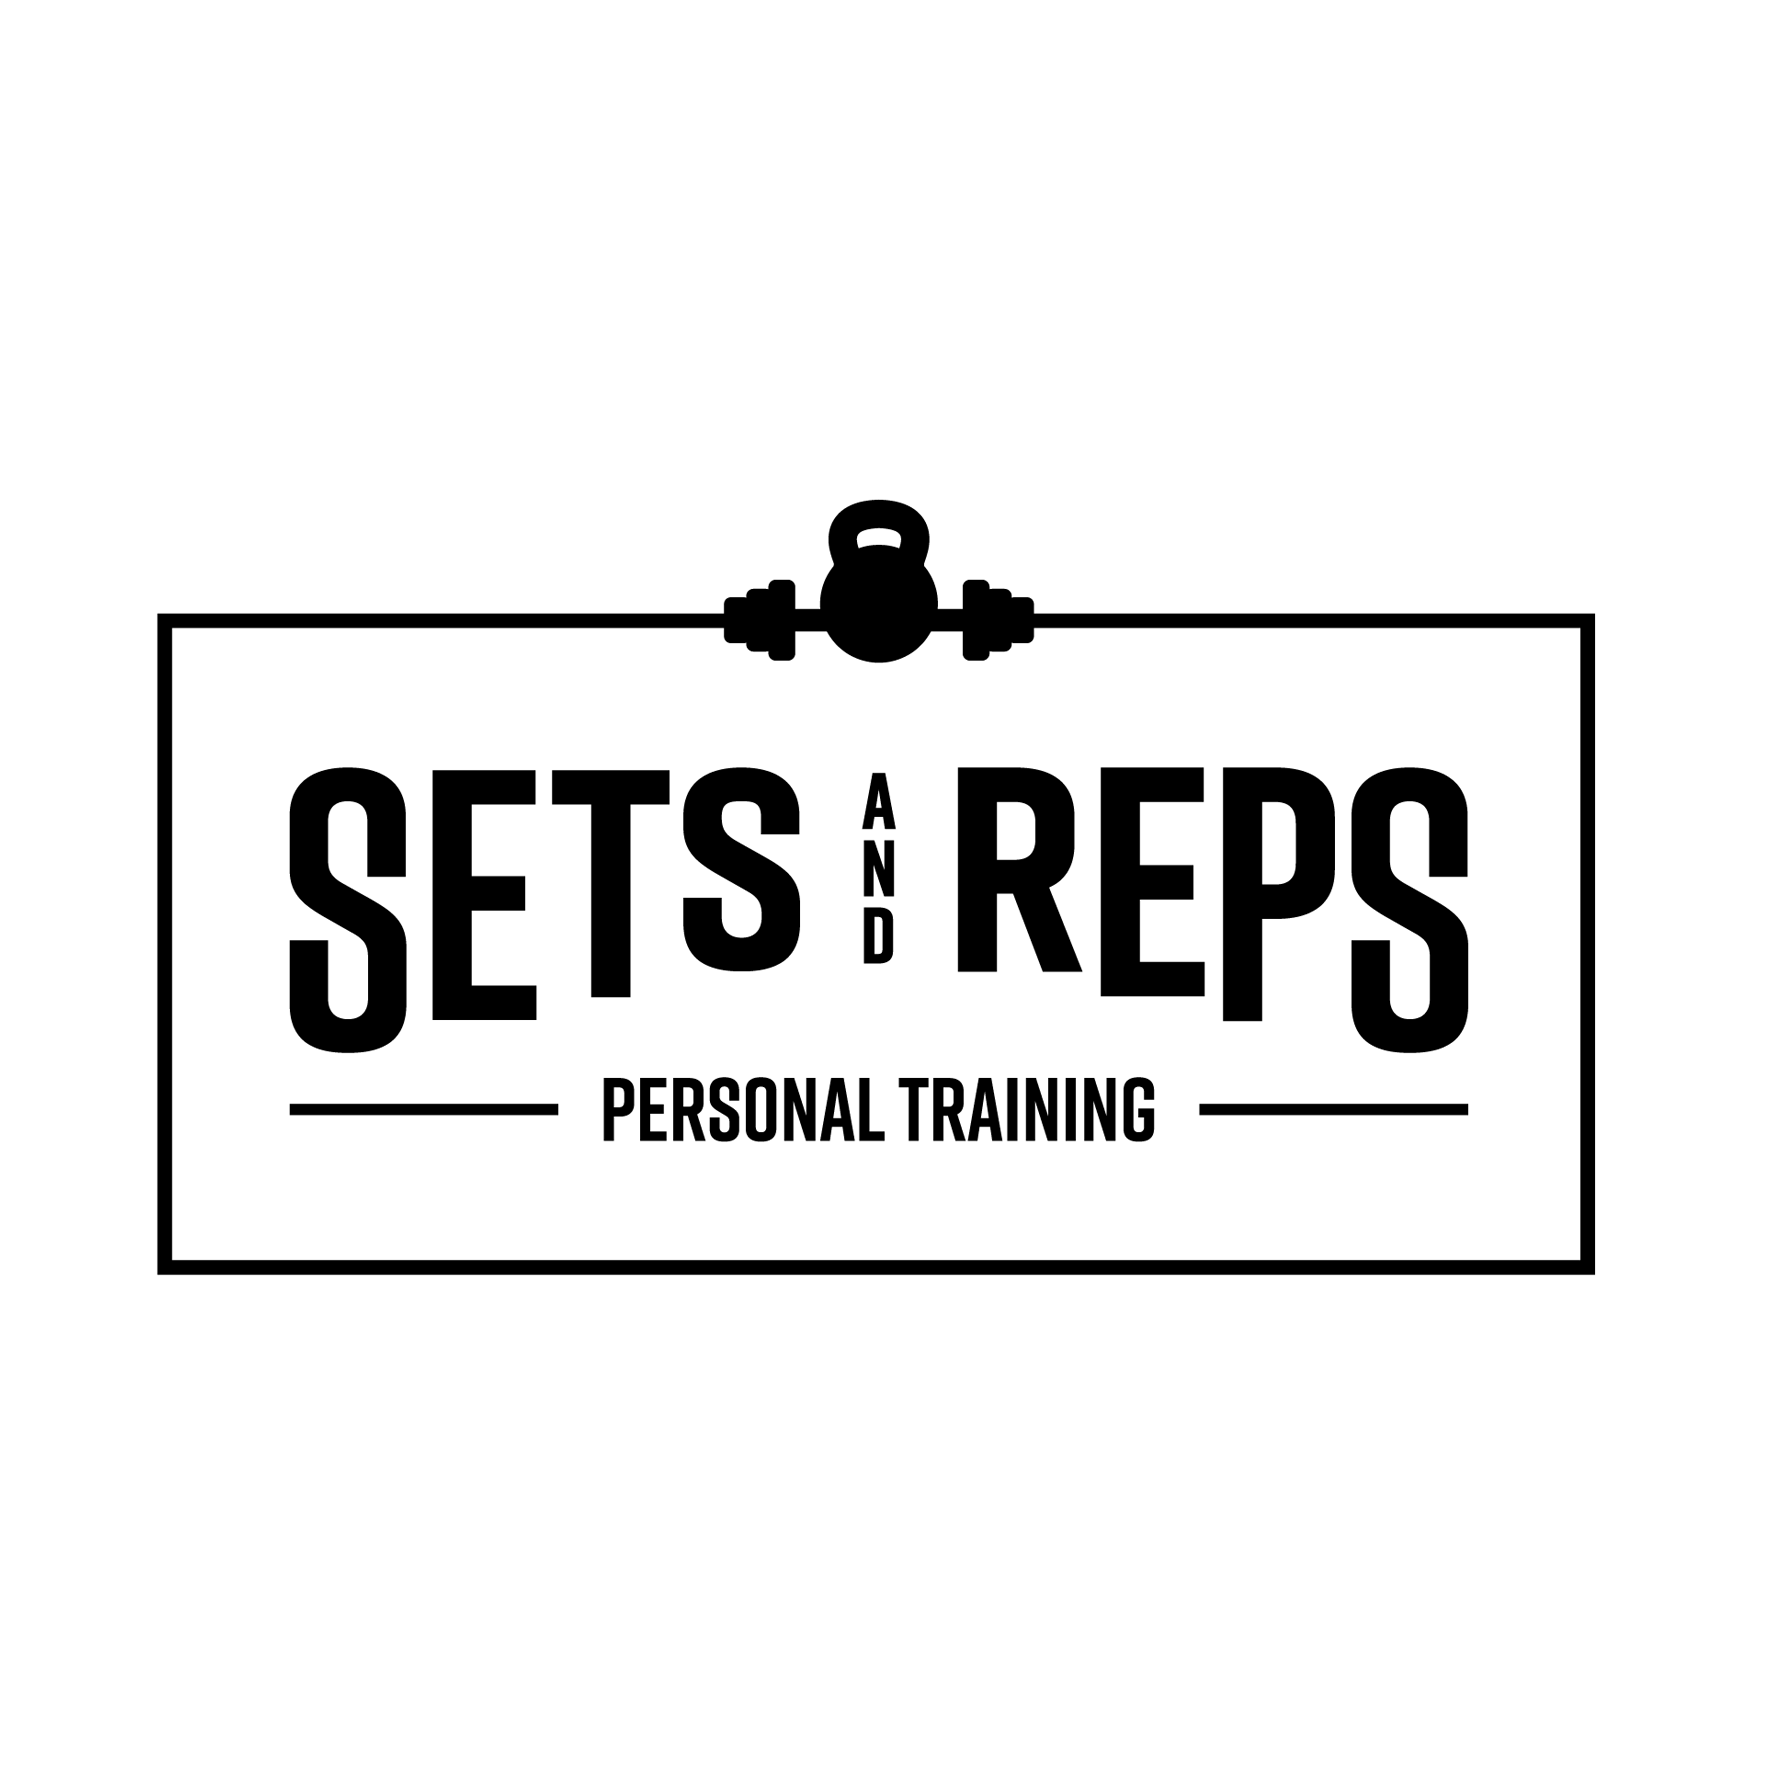 Sets-and-reps-personal-training-st-albans.png